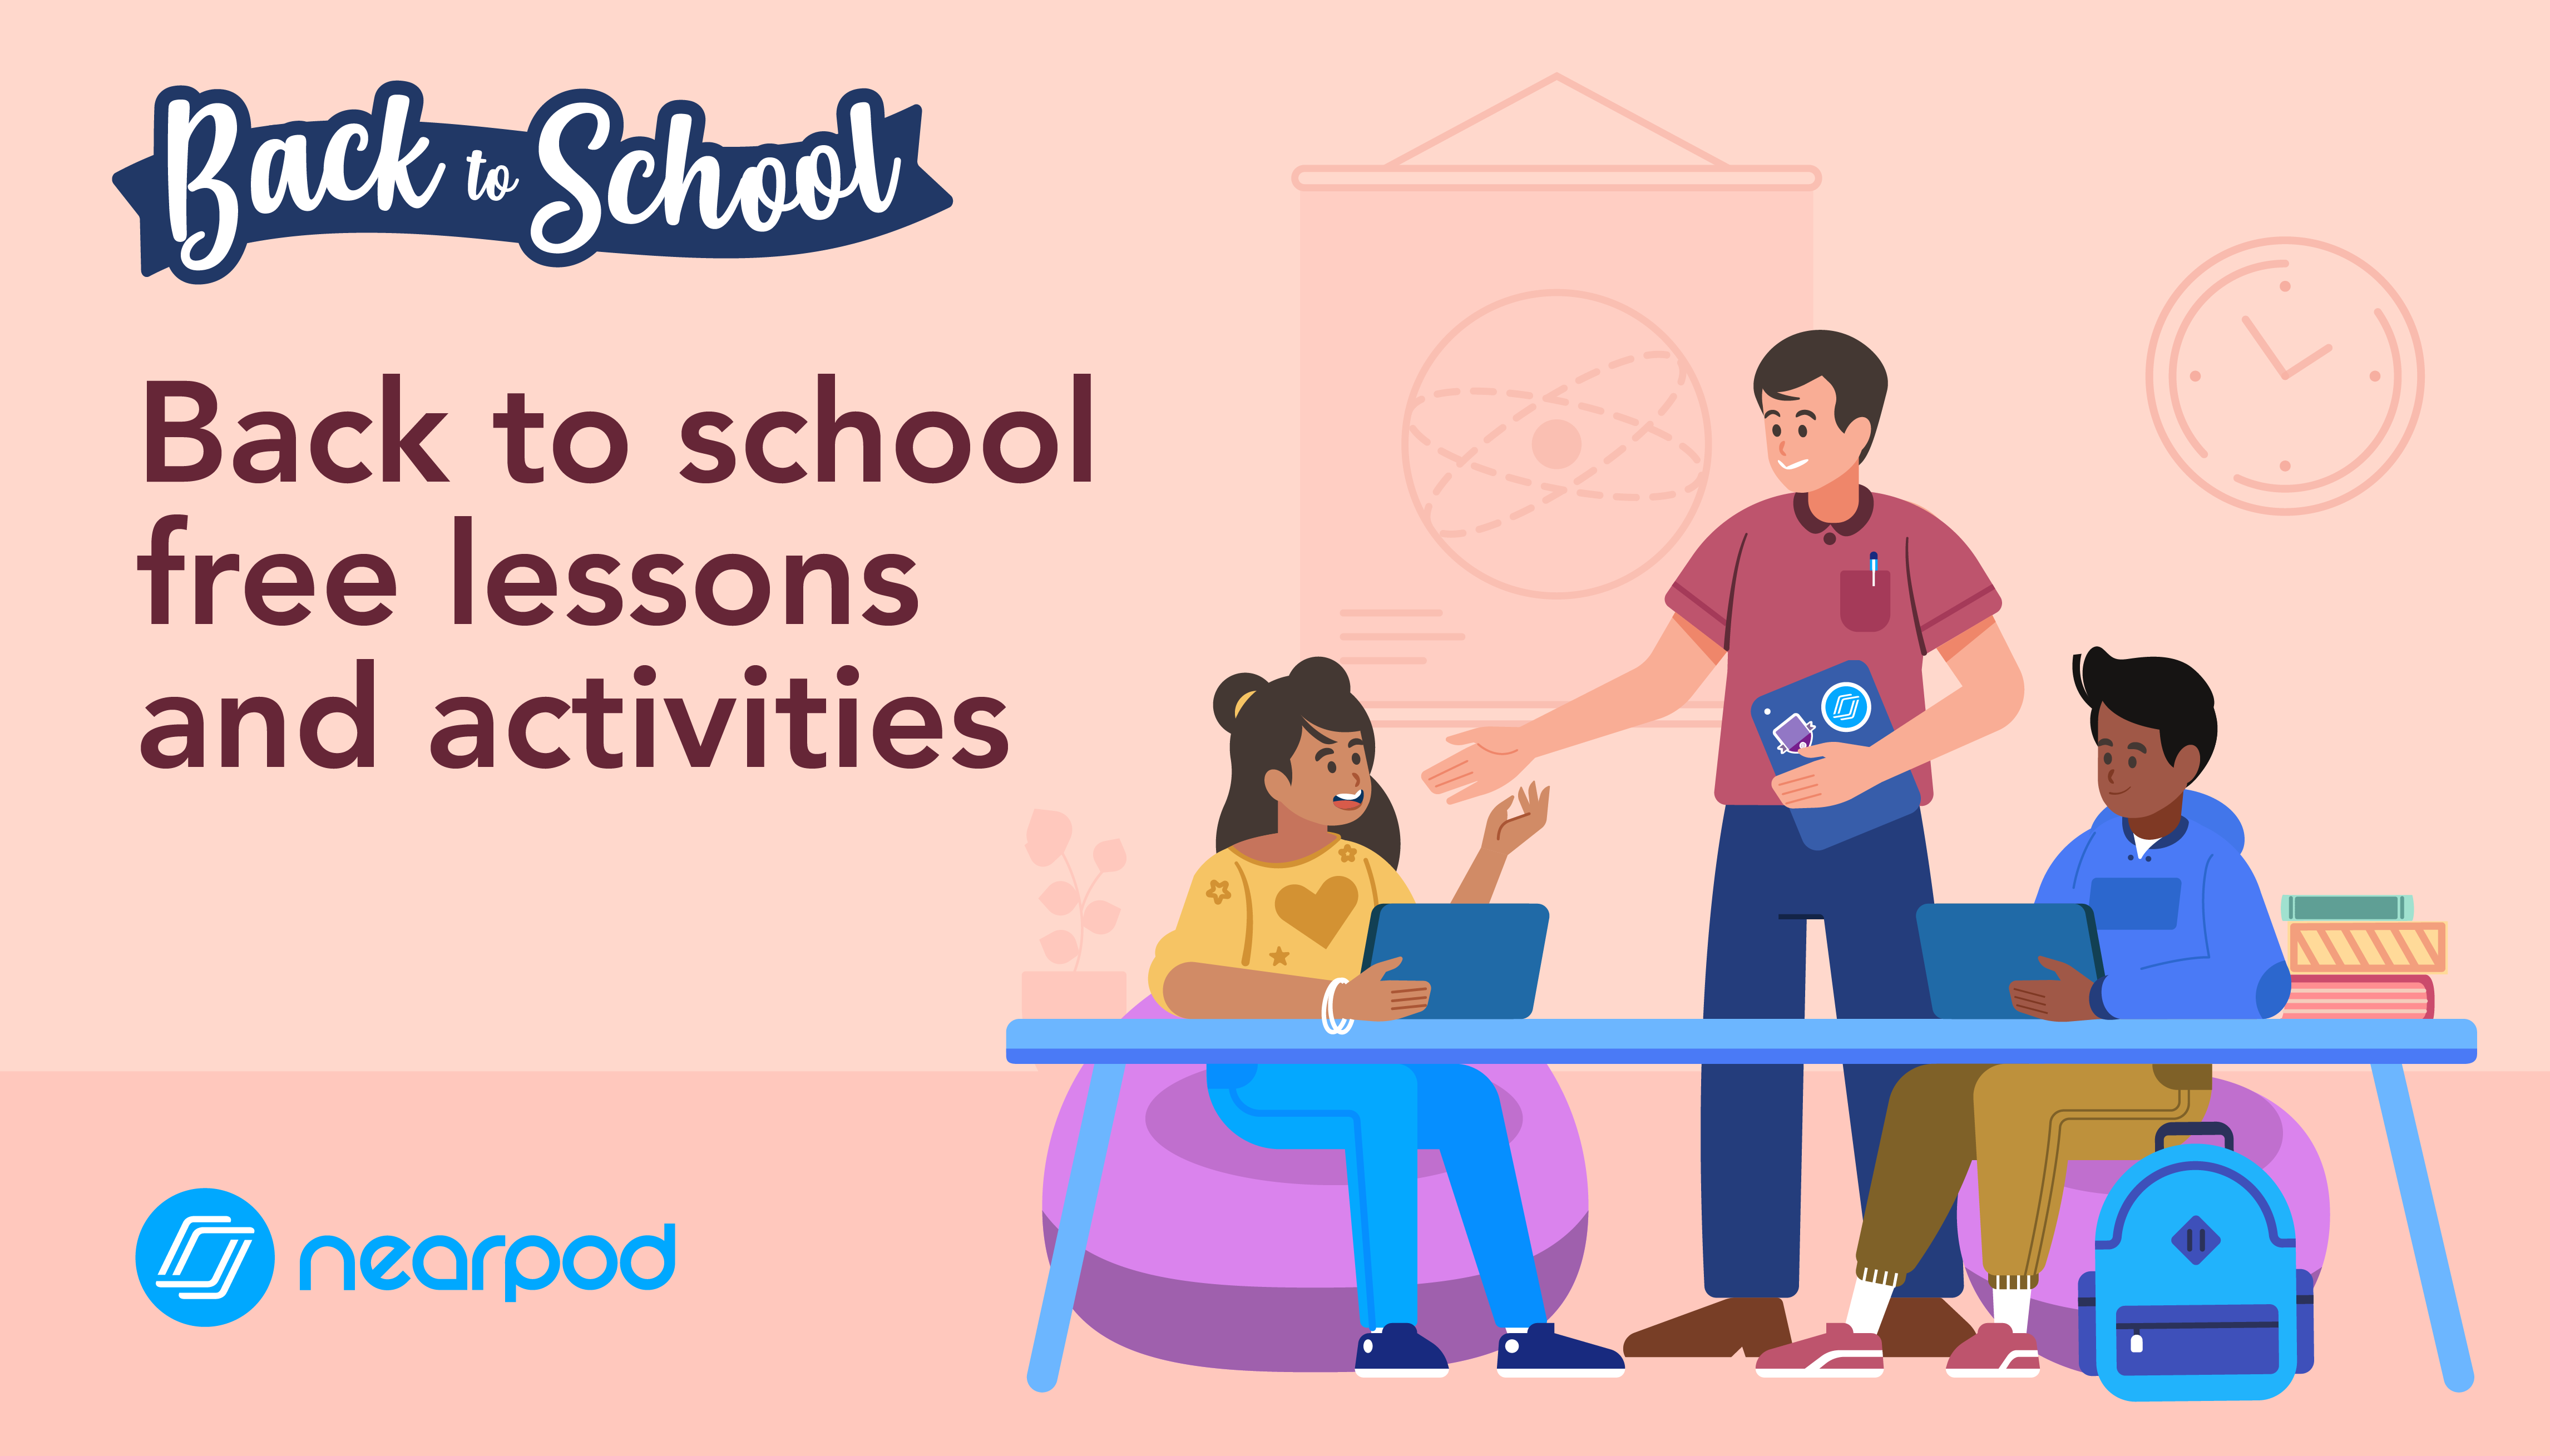 Back to school free lessons and activities - Nearpod Blog